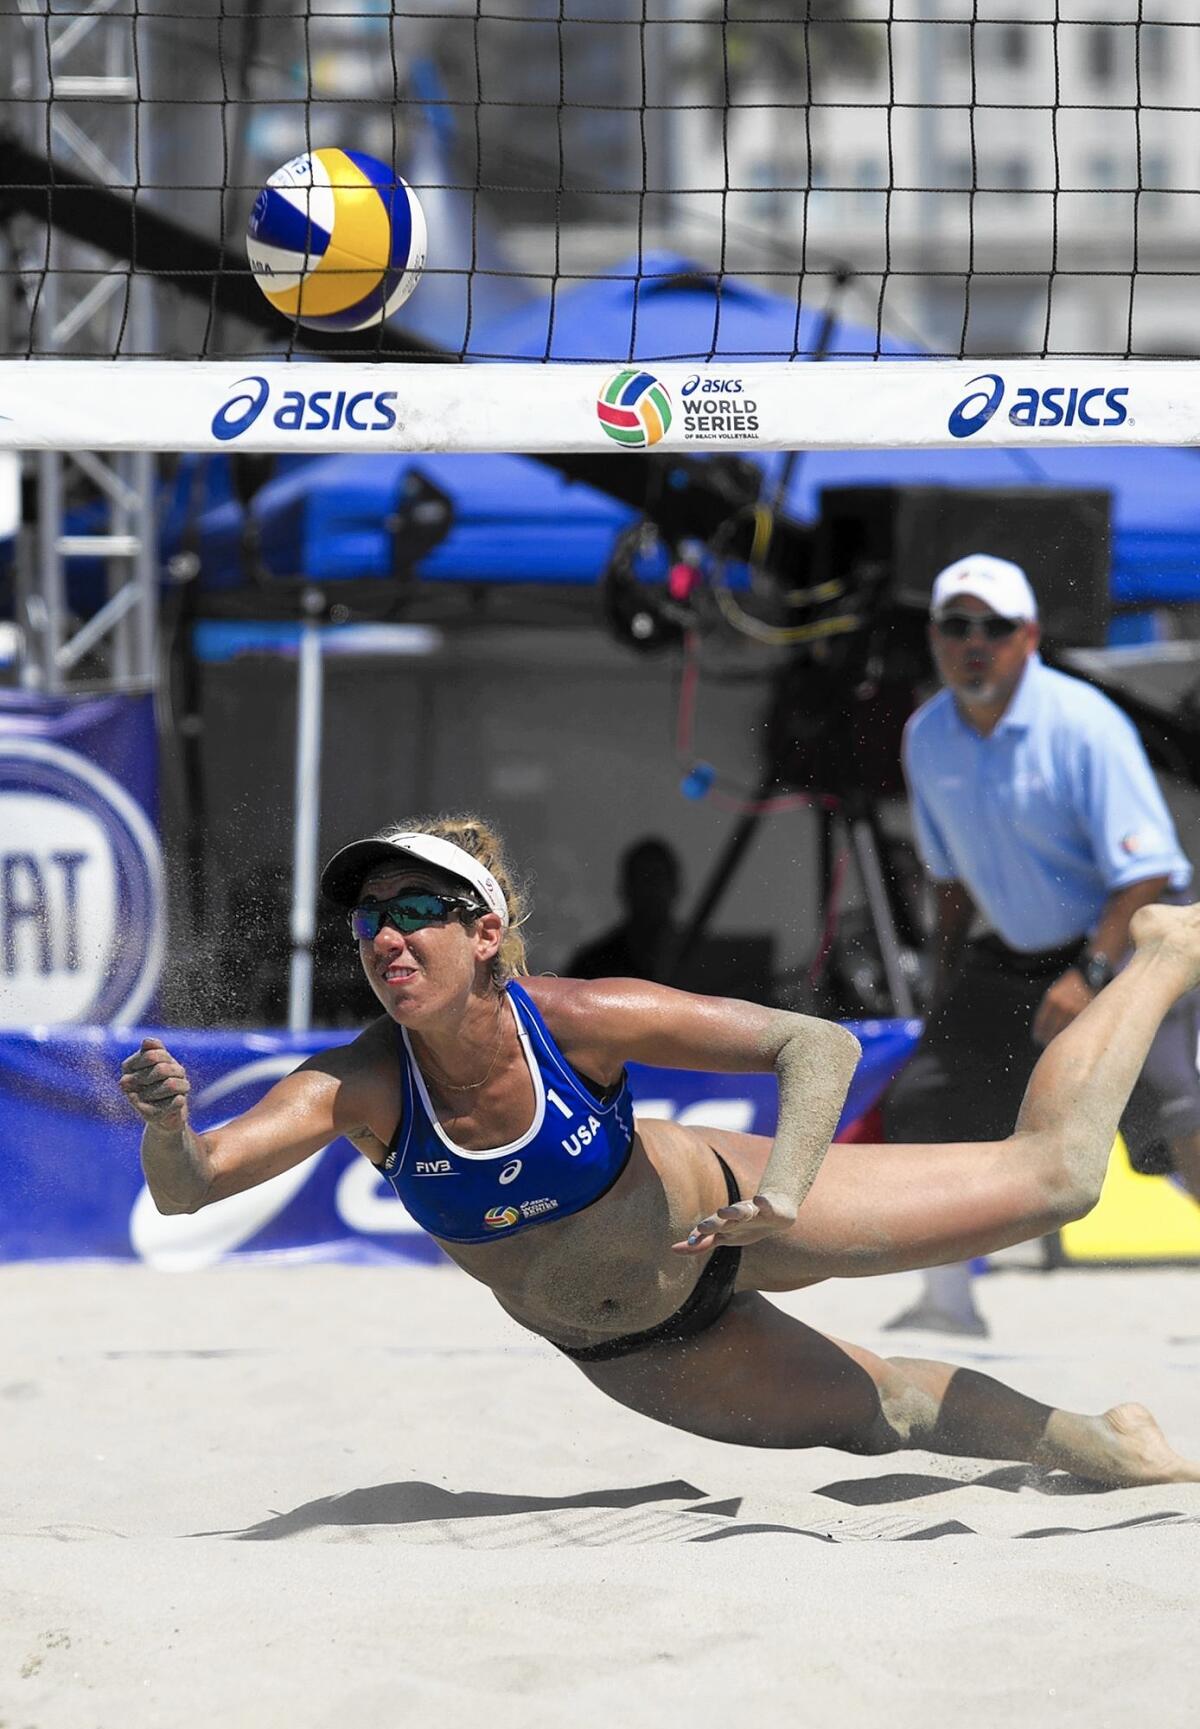 April Ross, a Newport Harbor High product who teamed with Jennifer Kessy to claim a silver medal at the London Olympic Games in 2012, has 22 AVP titles, including her first Manhattan Beach crown with Kerri Walsh Jennings last year.